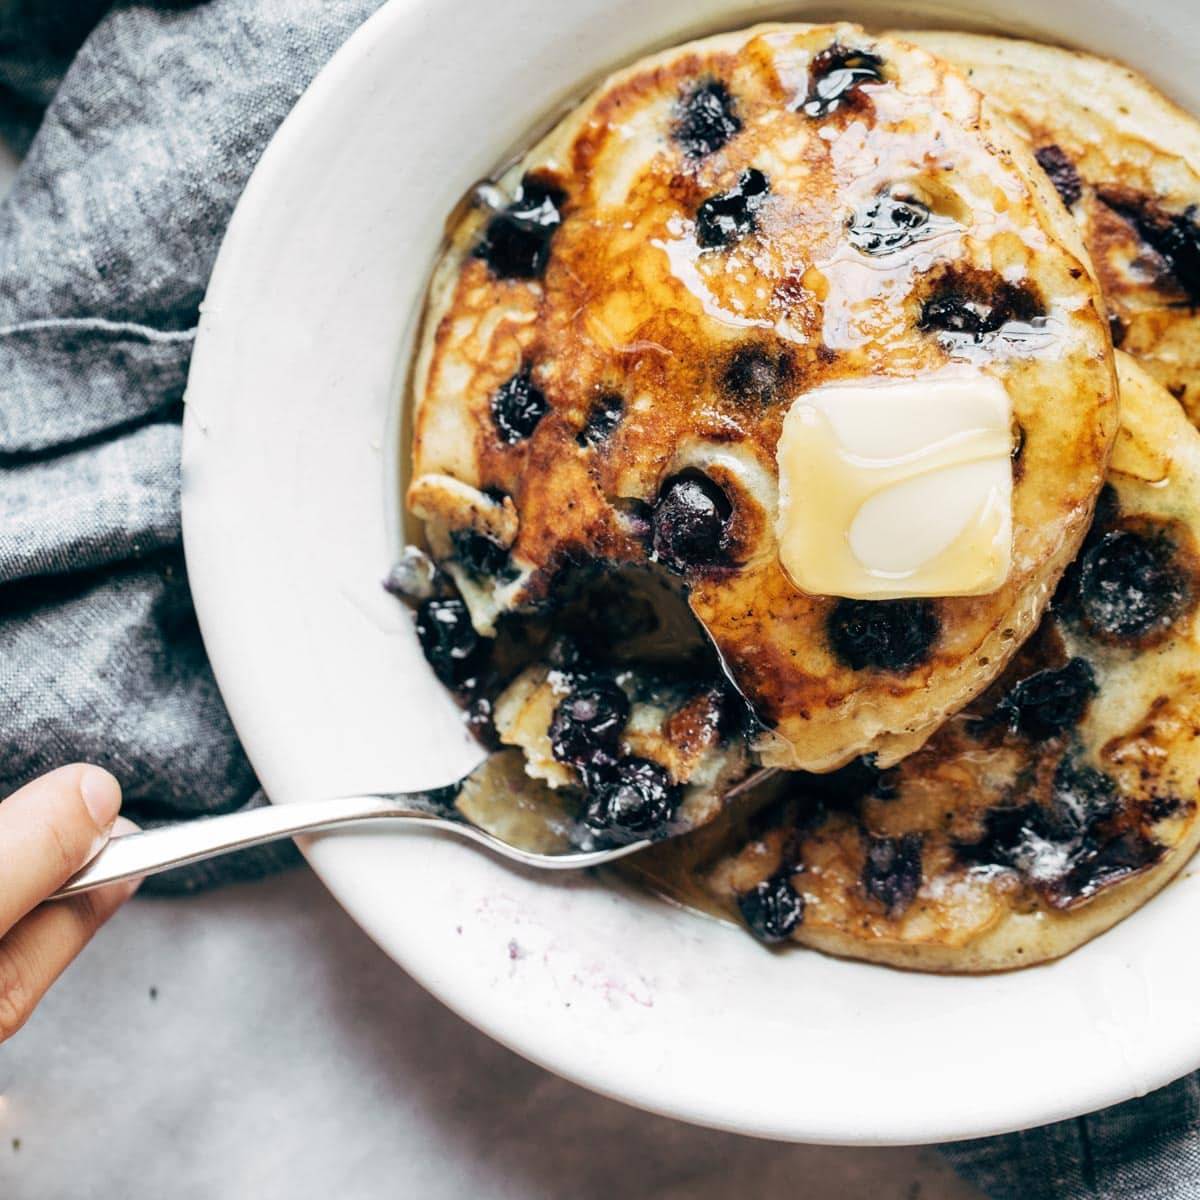 Blueberry pancakes with syrup and butter.